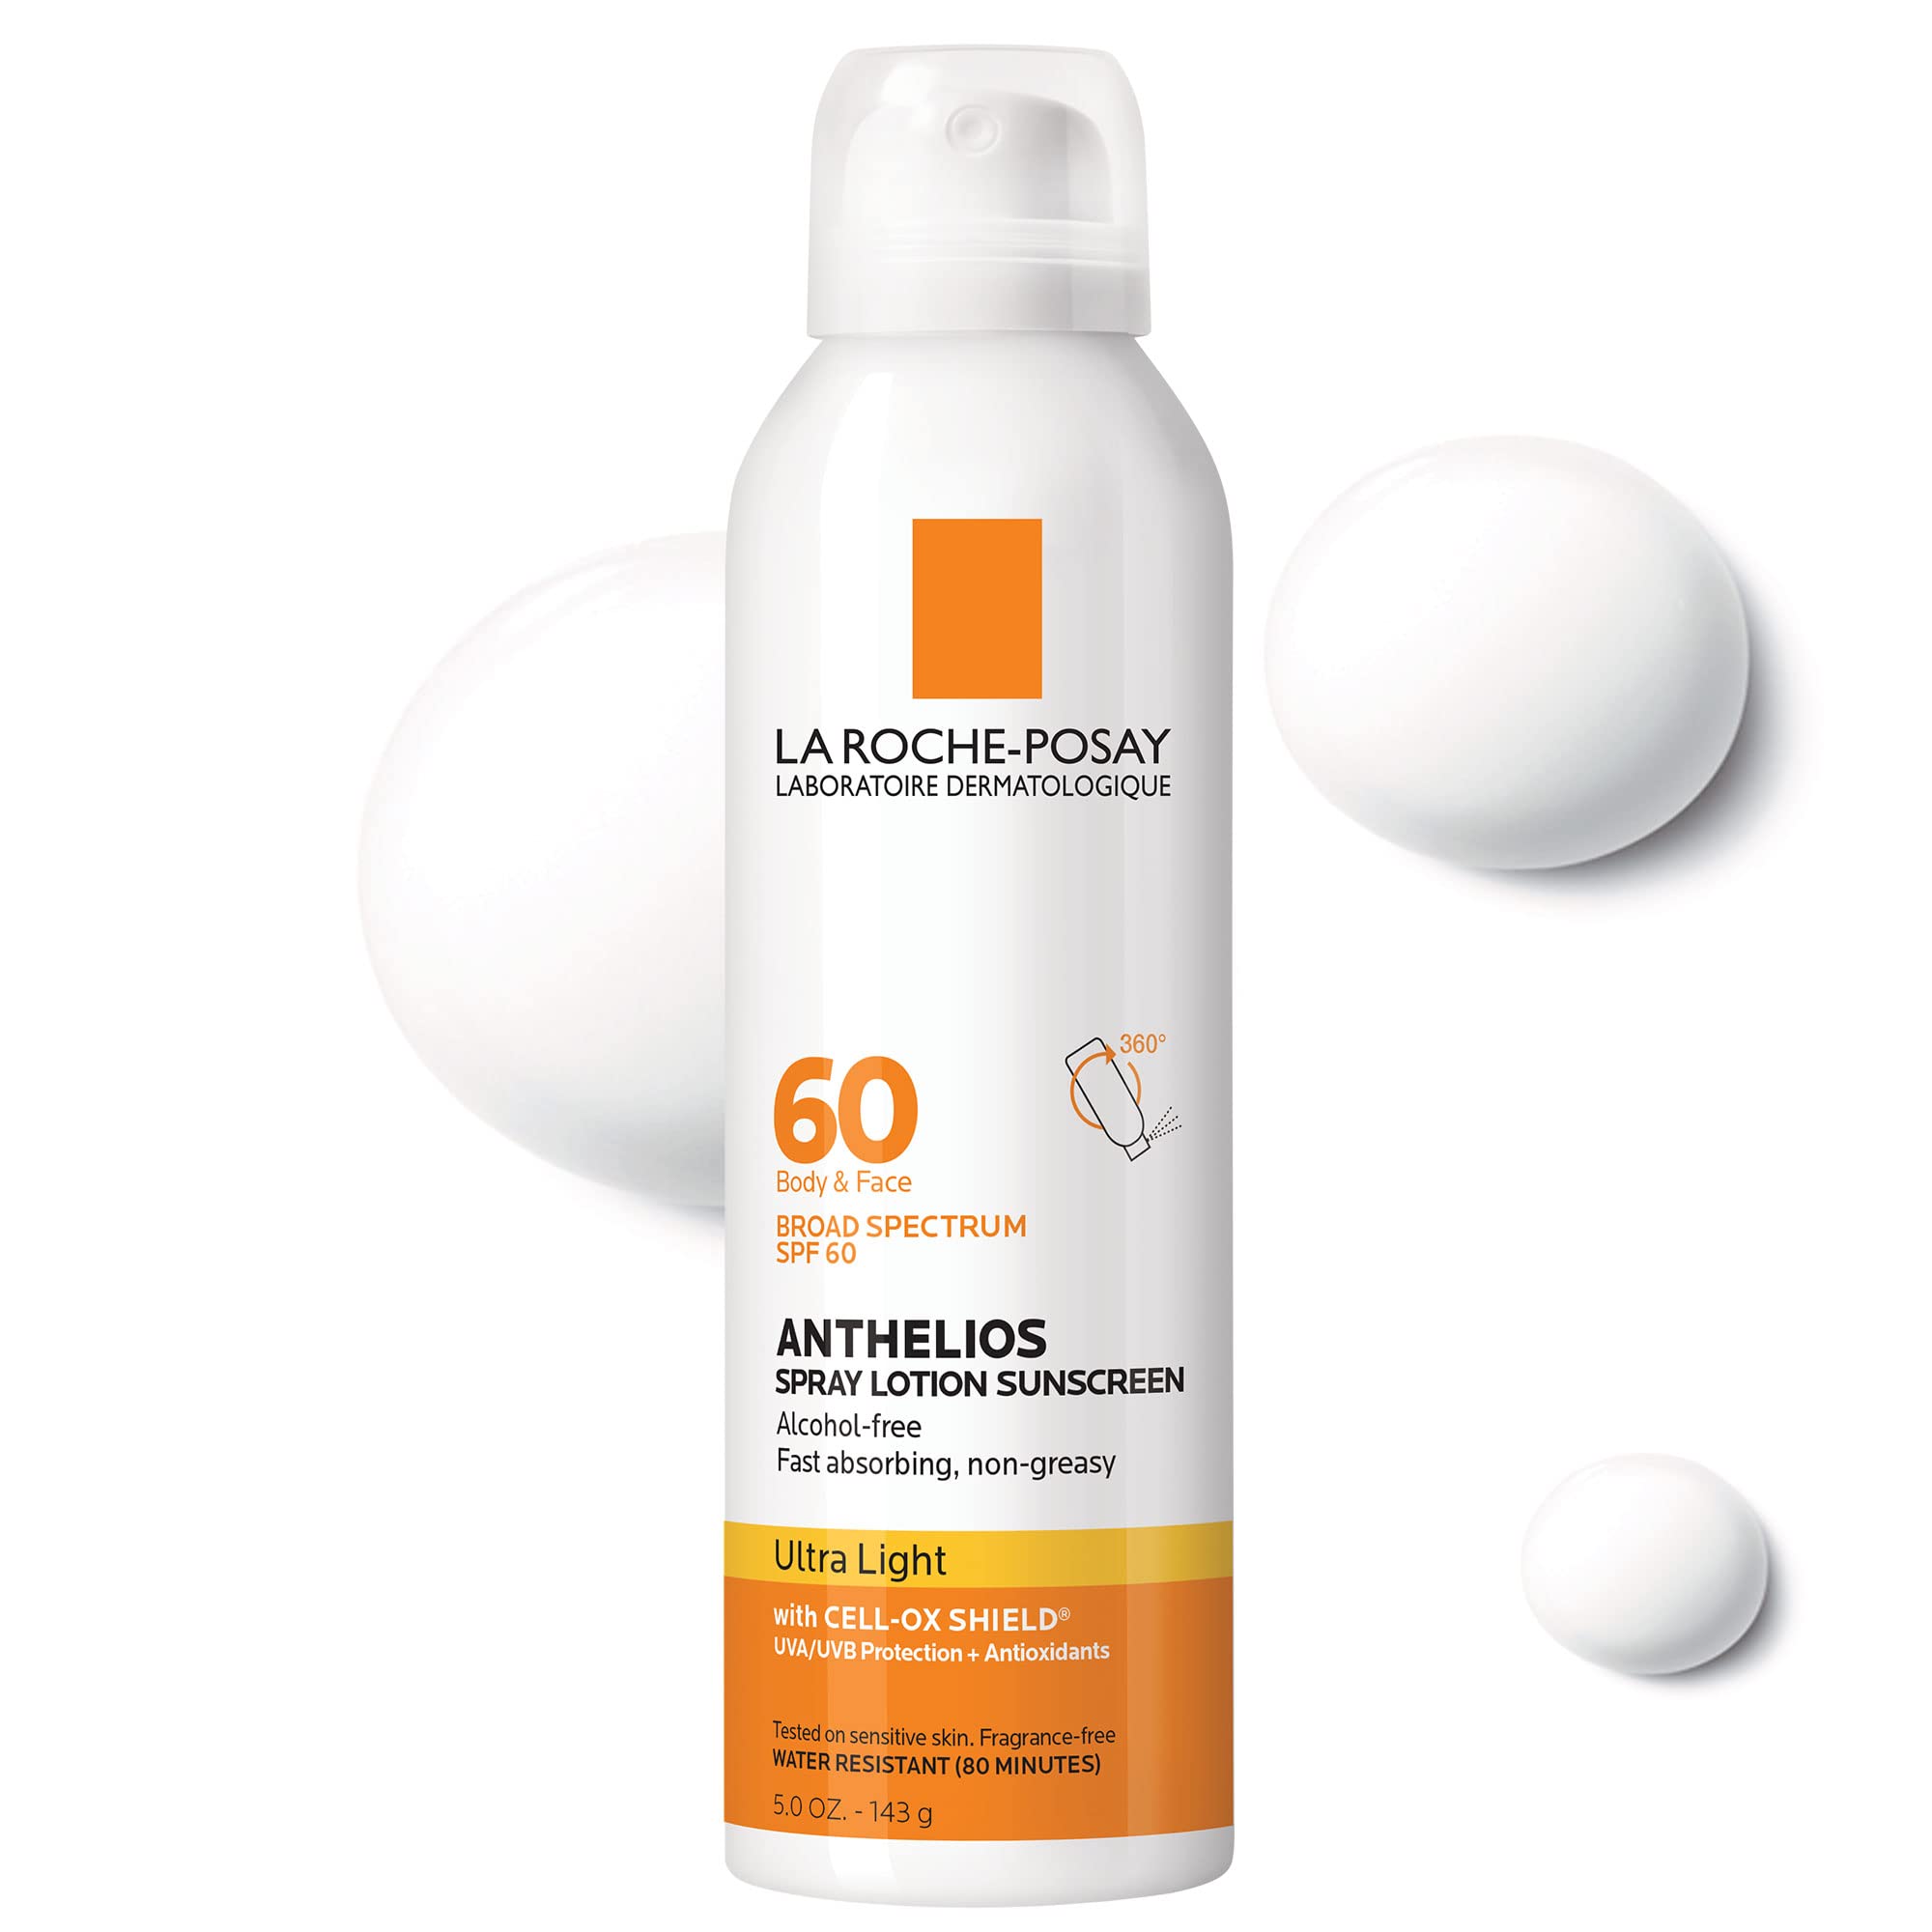 La Roche-Posay Anthelios Ultra-Light Sunscreen Lotion Spray Broad Spectrum SPF 60, Alcohol-Free, Oil-Free, Water Resistant, 5 Fl